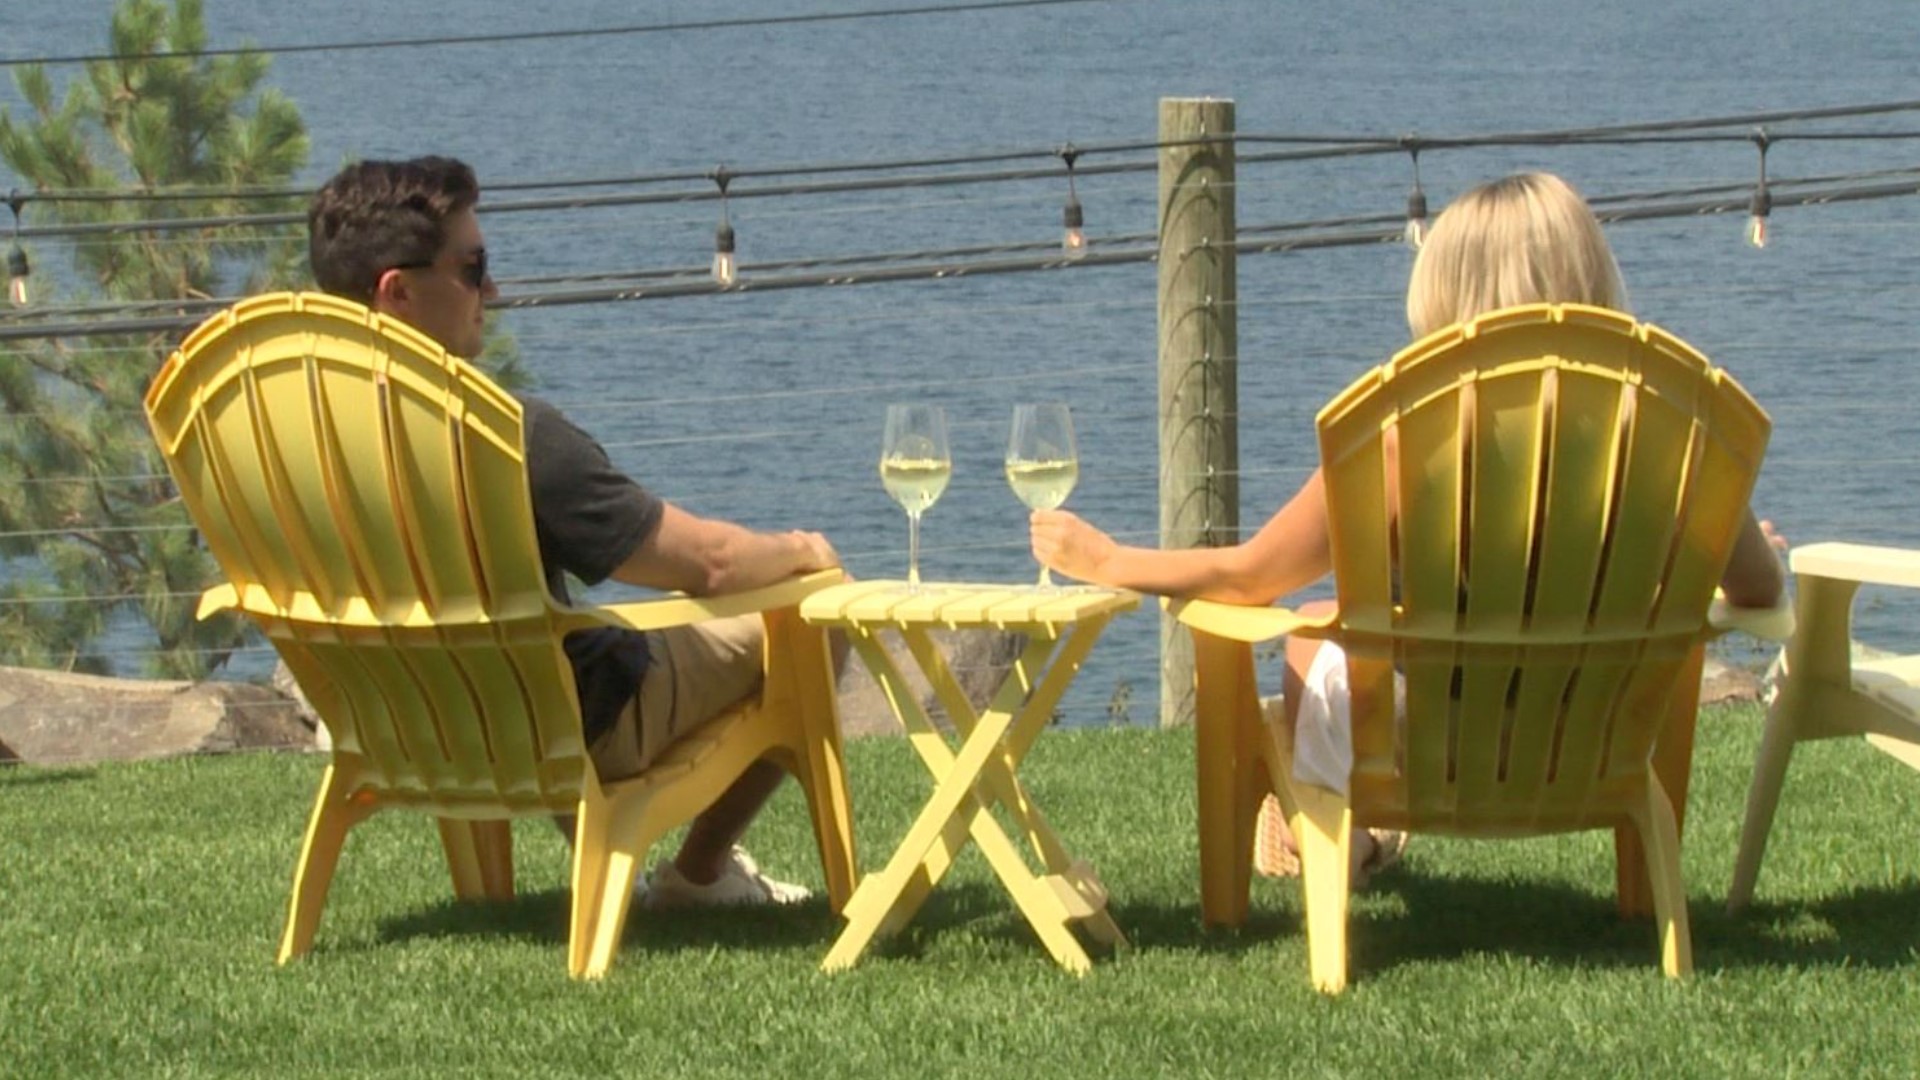 The Chelan Valley vineyards and tasting rooms offer a variety of experiences to visitors. #k5evening